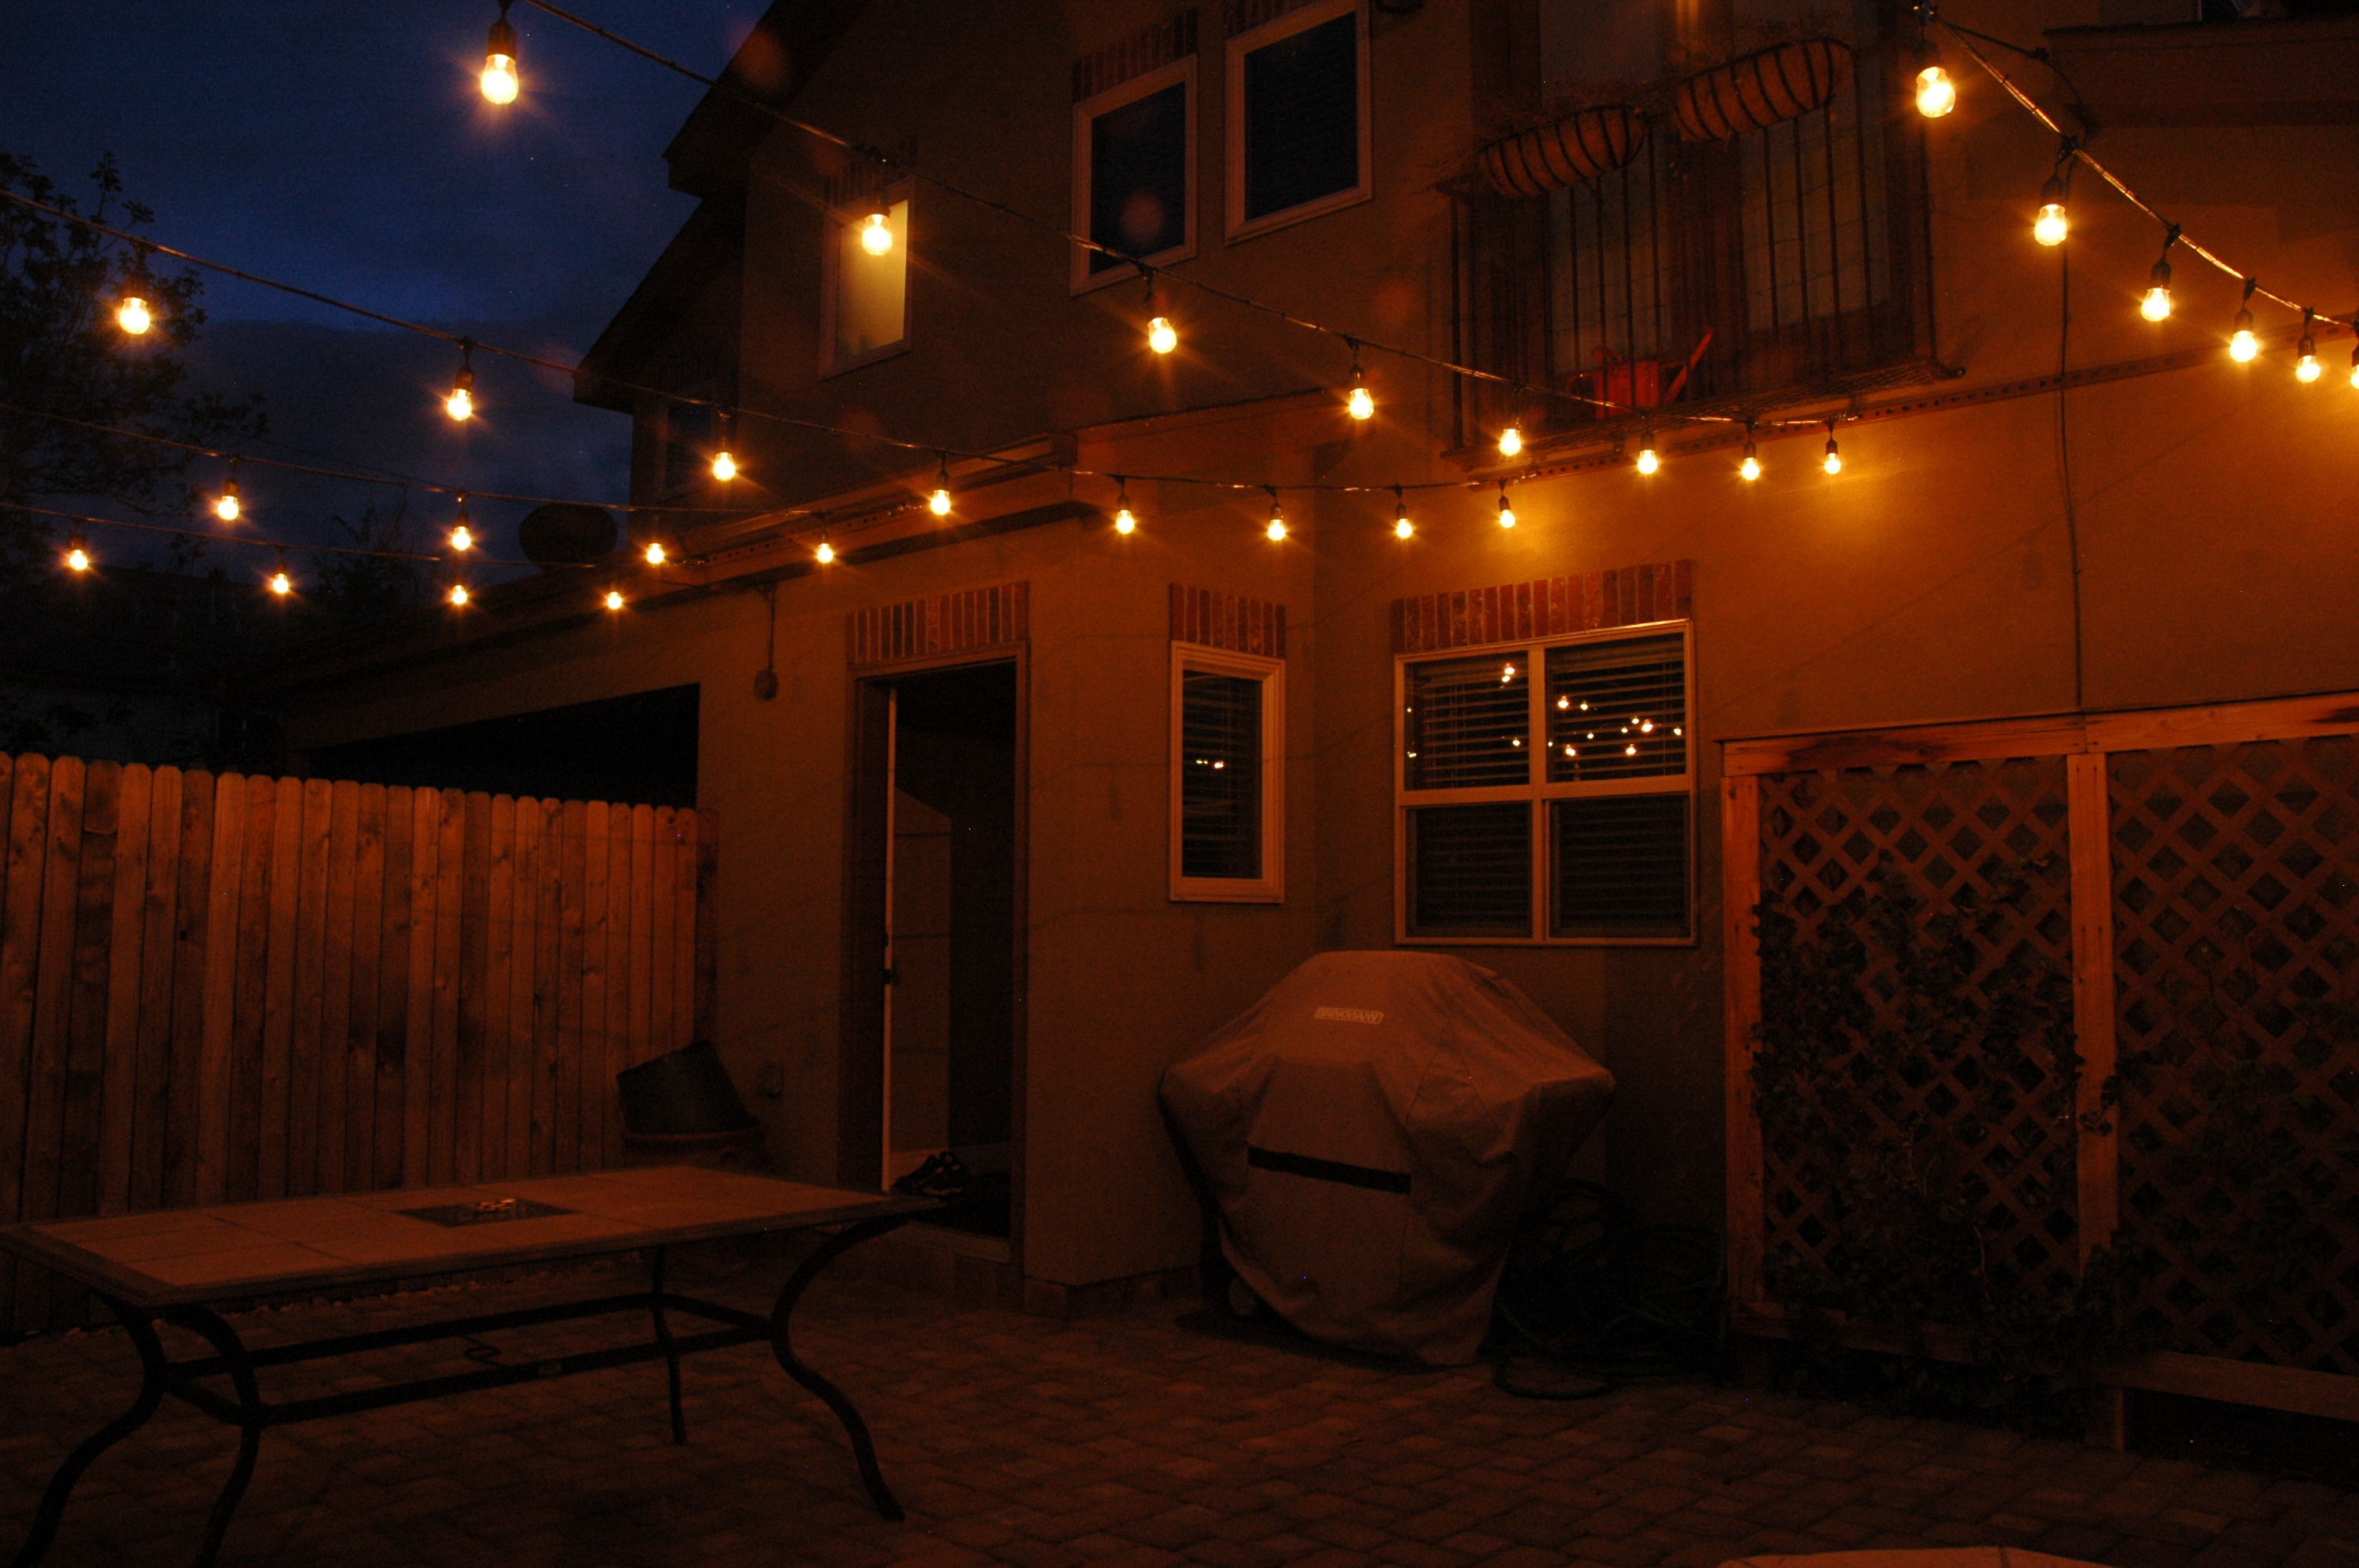 Exterior courtyard with string lighting